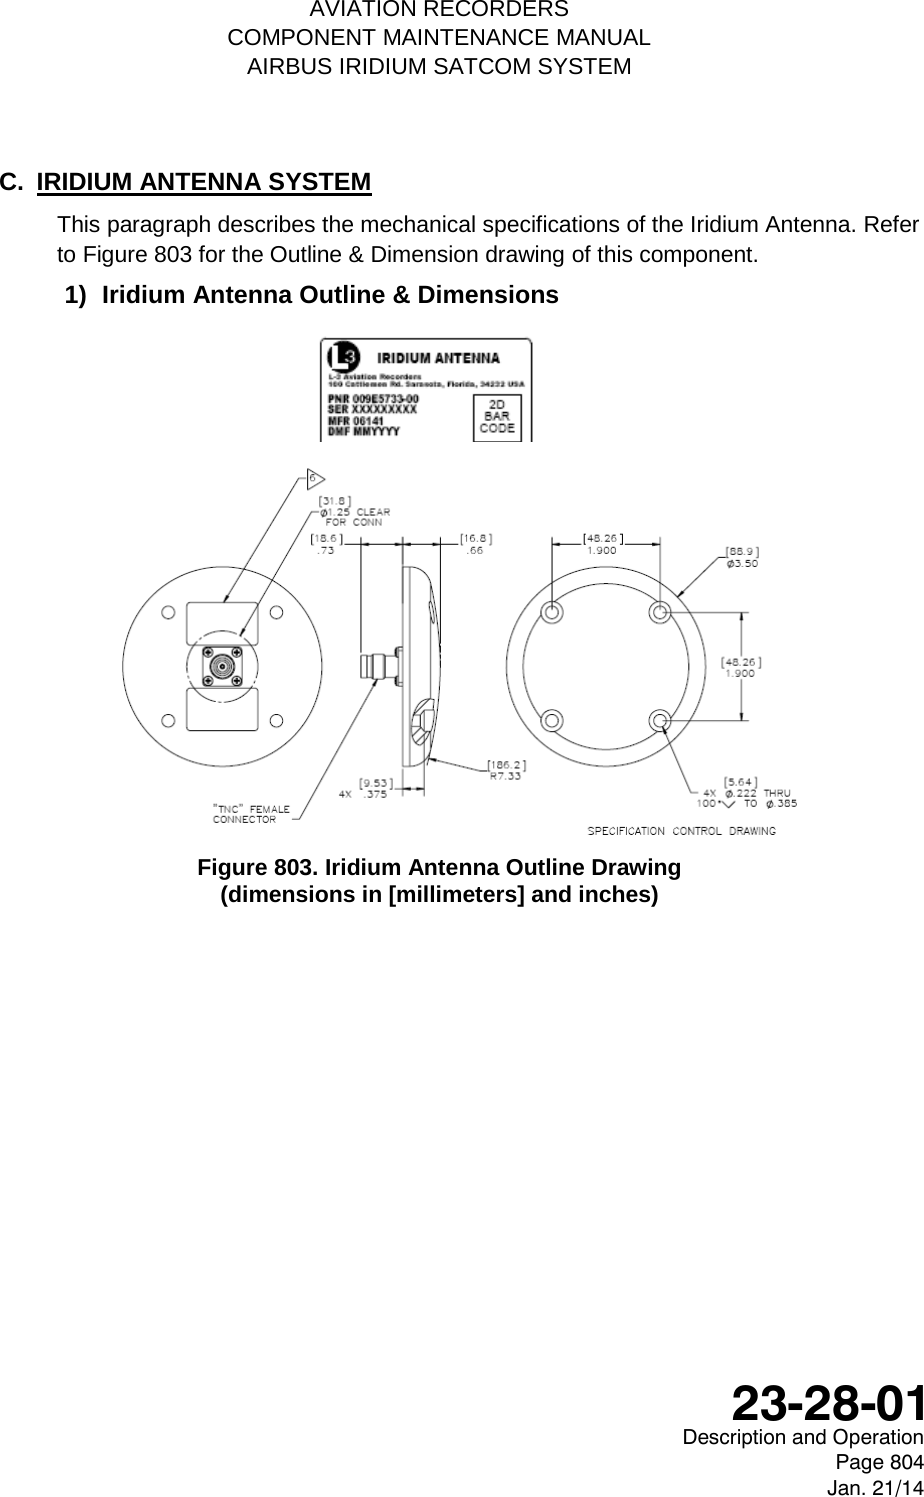    AVIATION RECORDERS COMPONENT MAINTENANCE MANUAL AIRBUS IRIDIUM SATCOM SYSTEM C.  IRIDIUM ANTENNA SYSTEM This paragraph describes the mechanical specifications of the Iridium Antenna. Refer to Figure 803 for the Outline &amp; Dimension drawing of this component. 1) Iridium Antenna Outline &amp; Dimensions            Figure 803. Iridium Antenna Outline Drawing  (dimensions in [millimeters] and inches)   Description and Operation Page 804 Jan. 21/14  23-28-01 